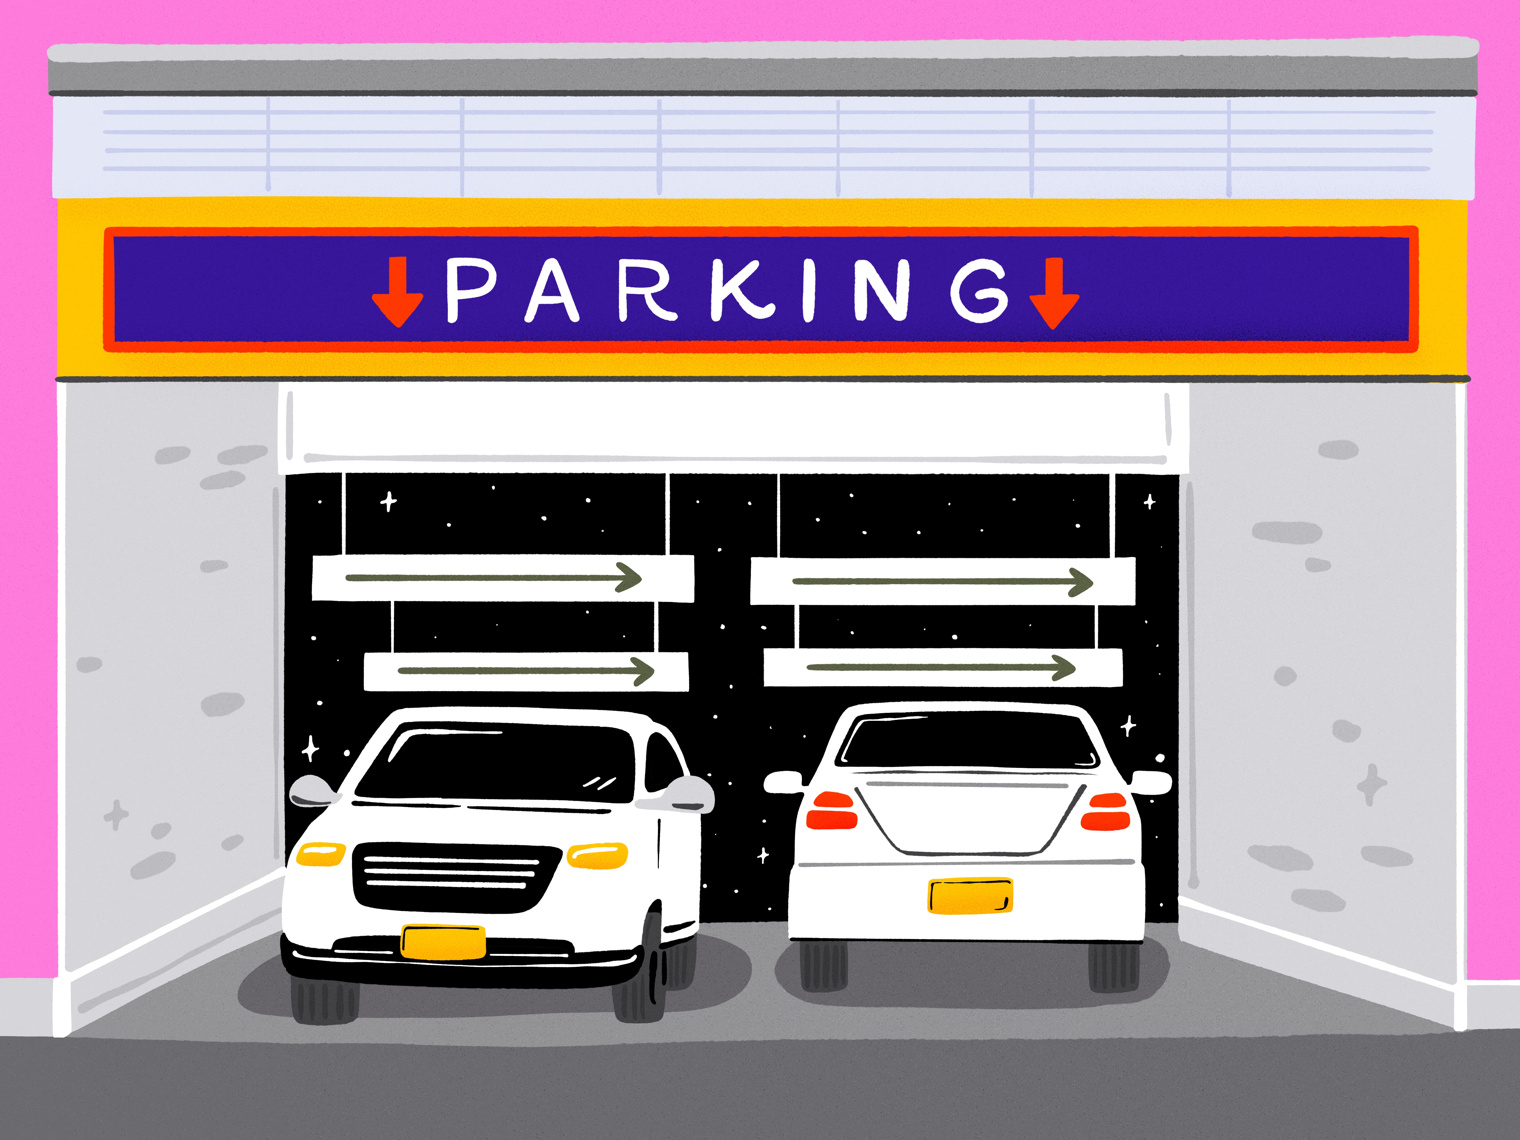 Lead image for the article Parking Near Broadway Theaters